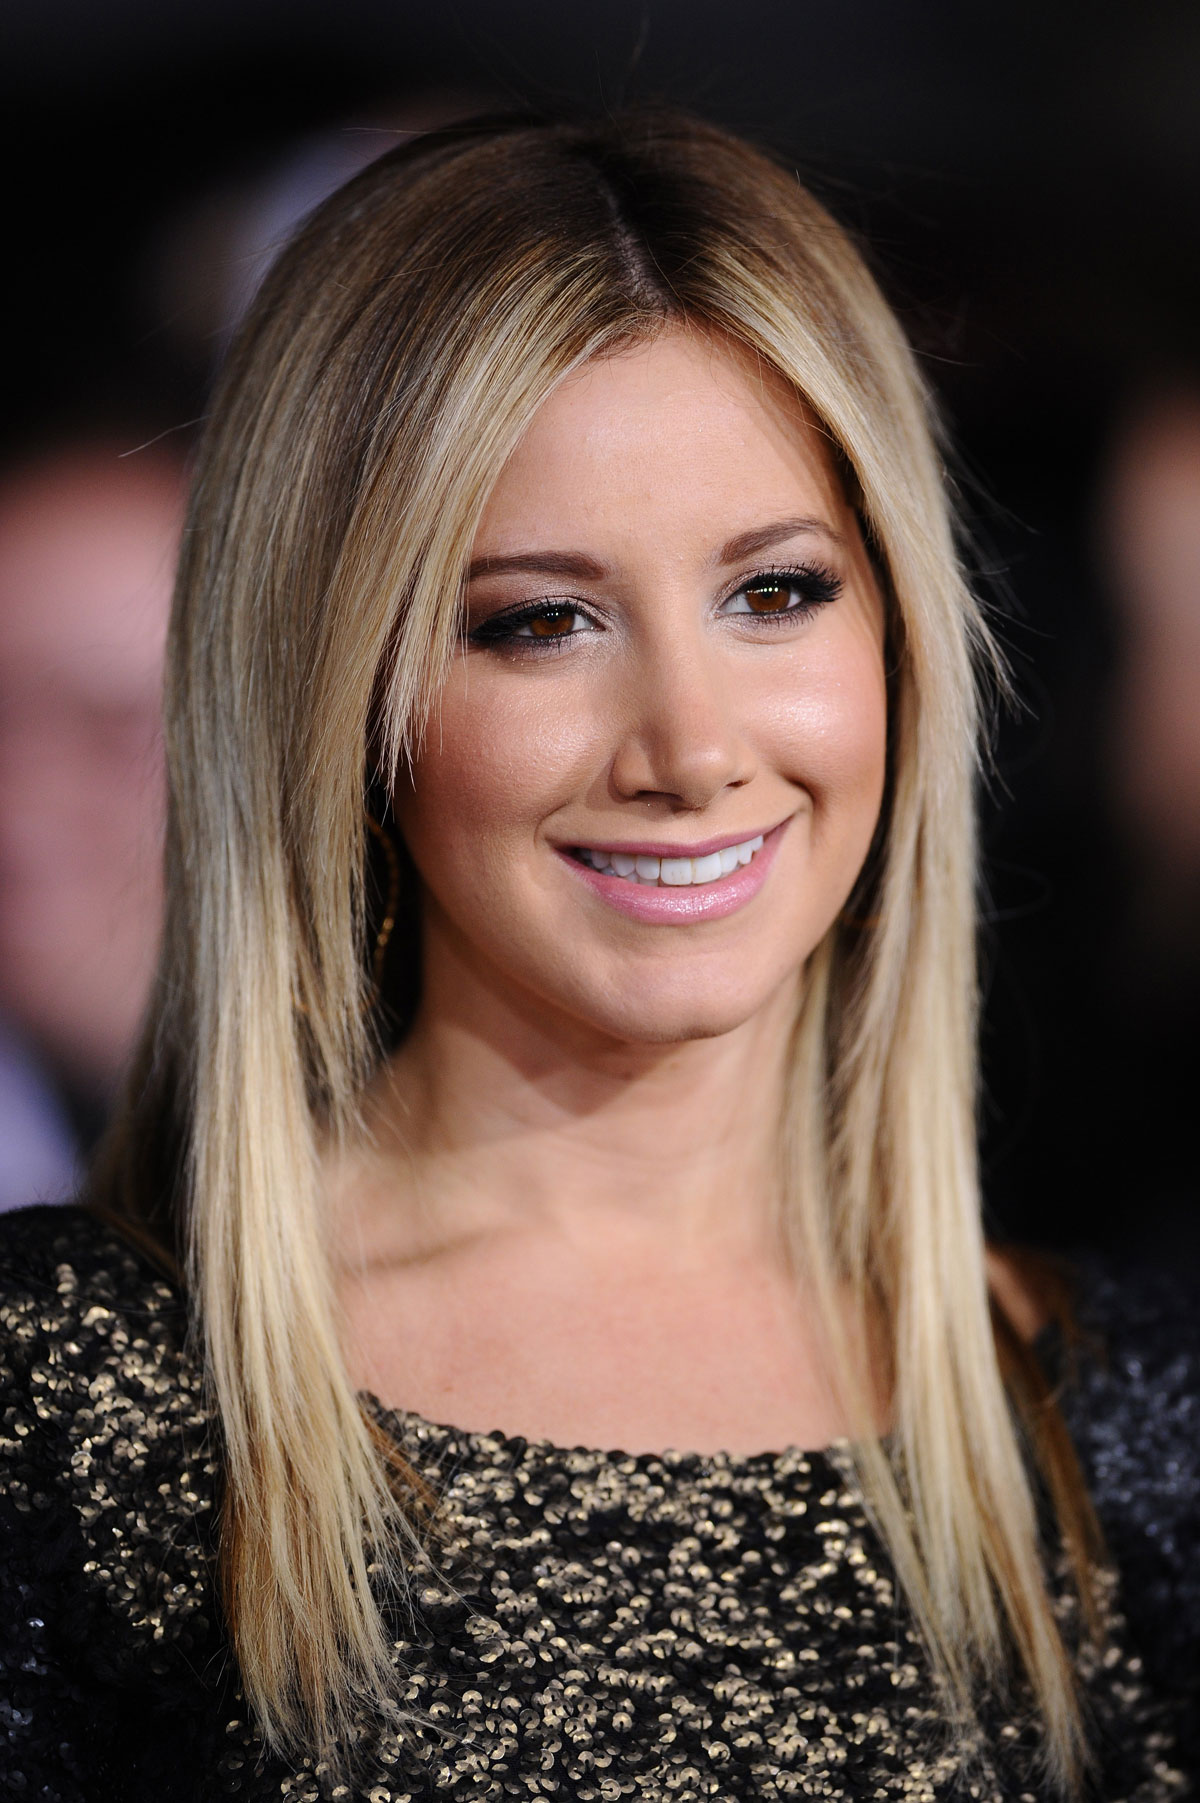 ASHLEY TISDALE at The Twilight Saga: Breaking Dawn – Part 2 Premiere in ...